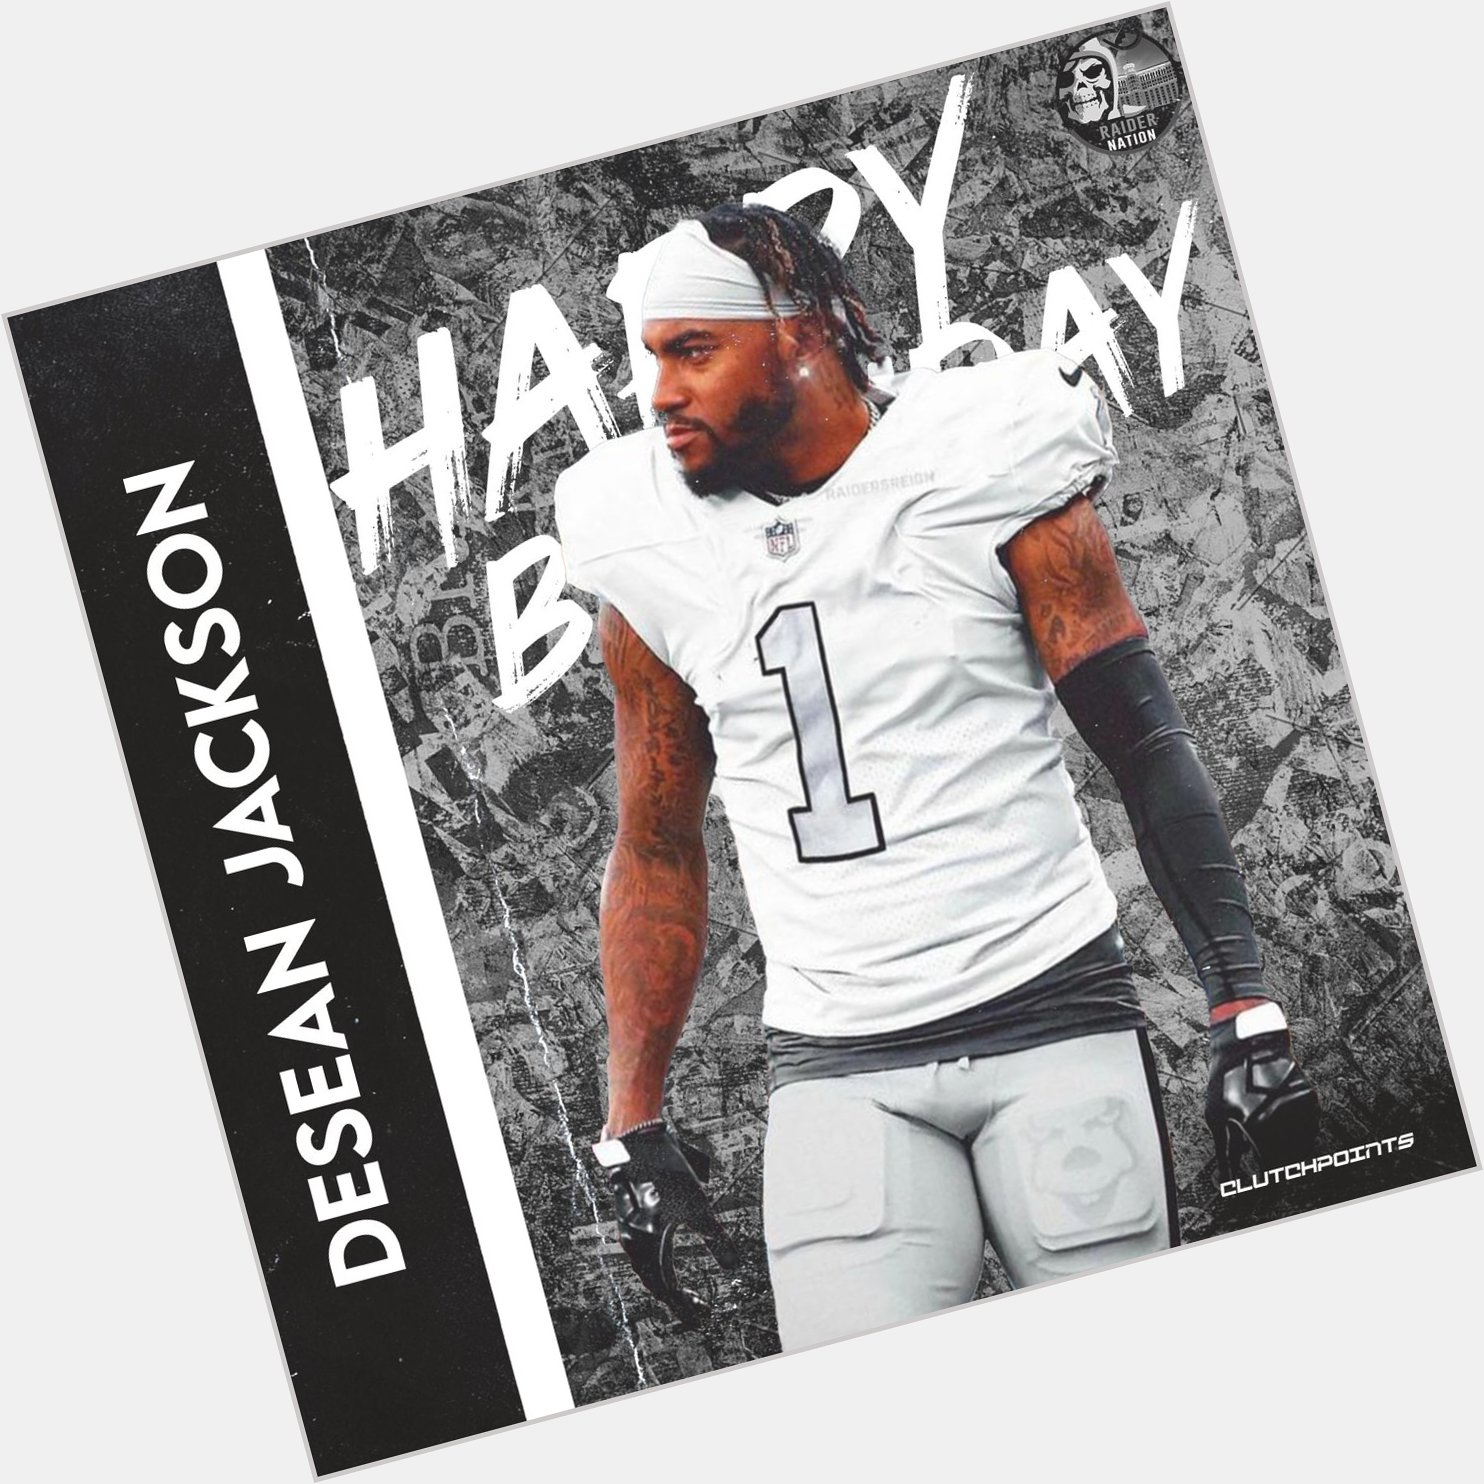 Join Raiders Nation in greeting 3x Pro Bowler, DeSean Jackson, a happy 35th birthday! 